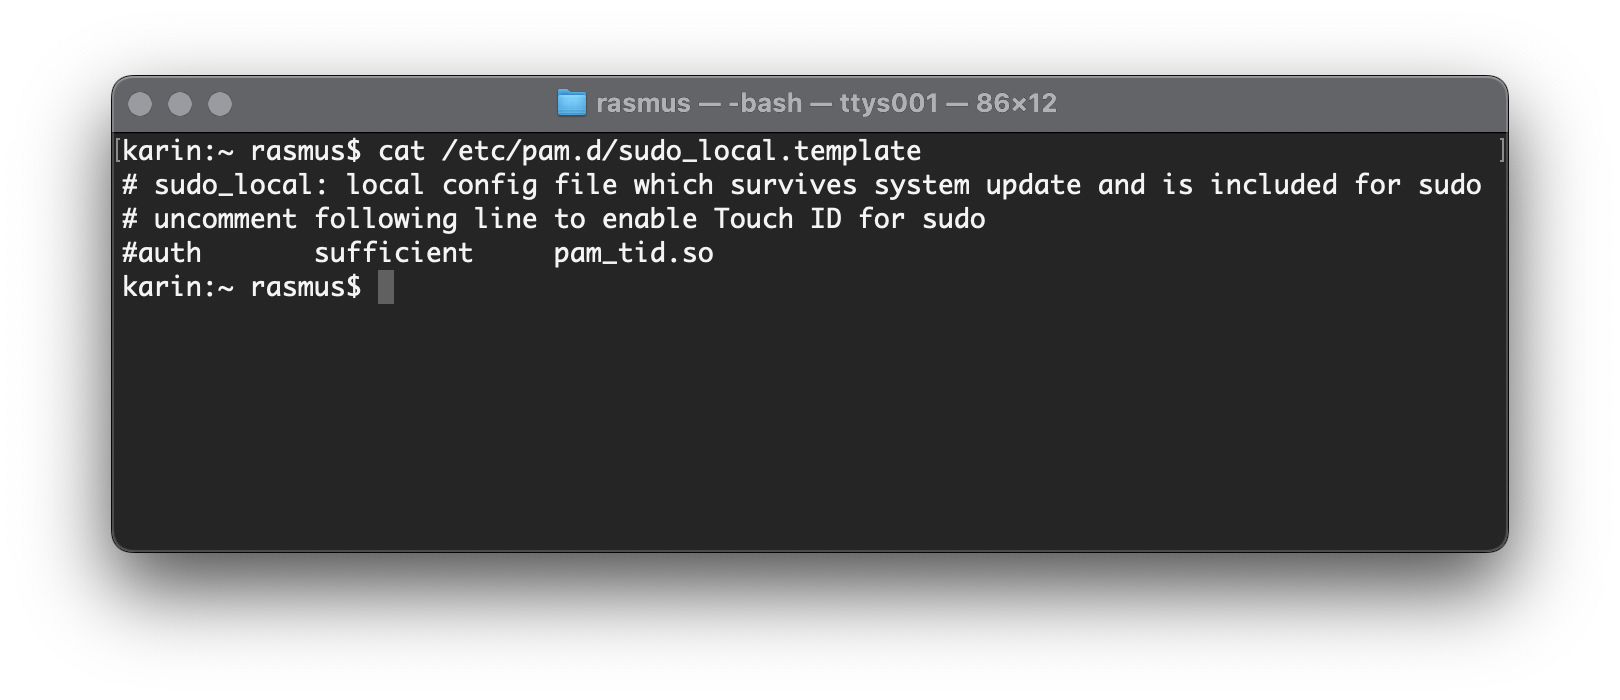 Terminal window that says: $ cat /etc/pam.d/sudo_local.template 
&10;# sudo_local: local config file which survives system update and is included for sudo
&10;# uncomment following line to enable Touch ID for sudo
&10;#auth       sufficient     pam_tid.so
&10;